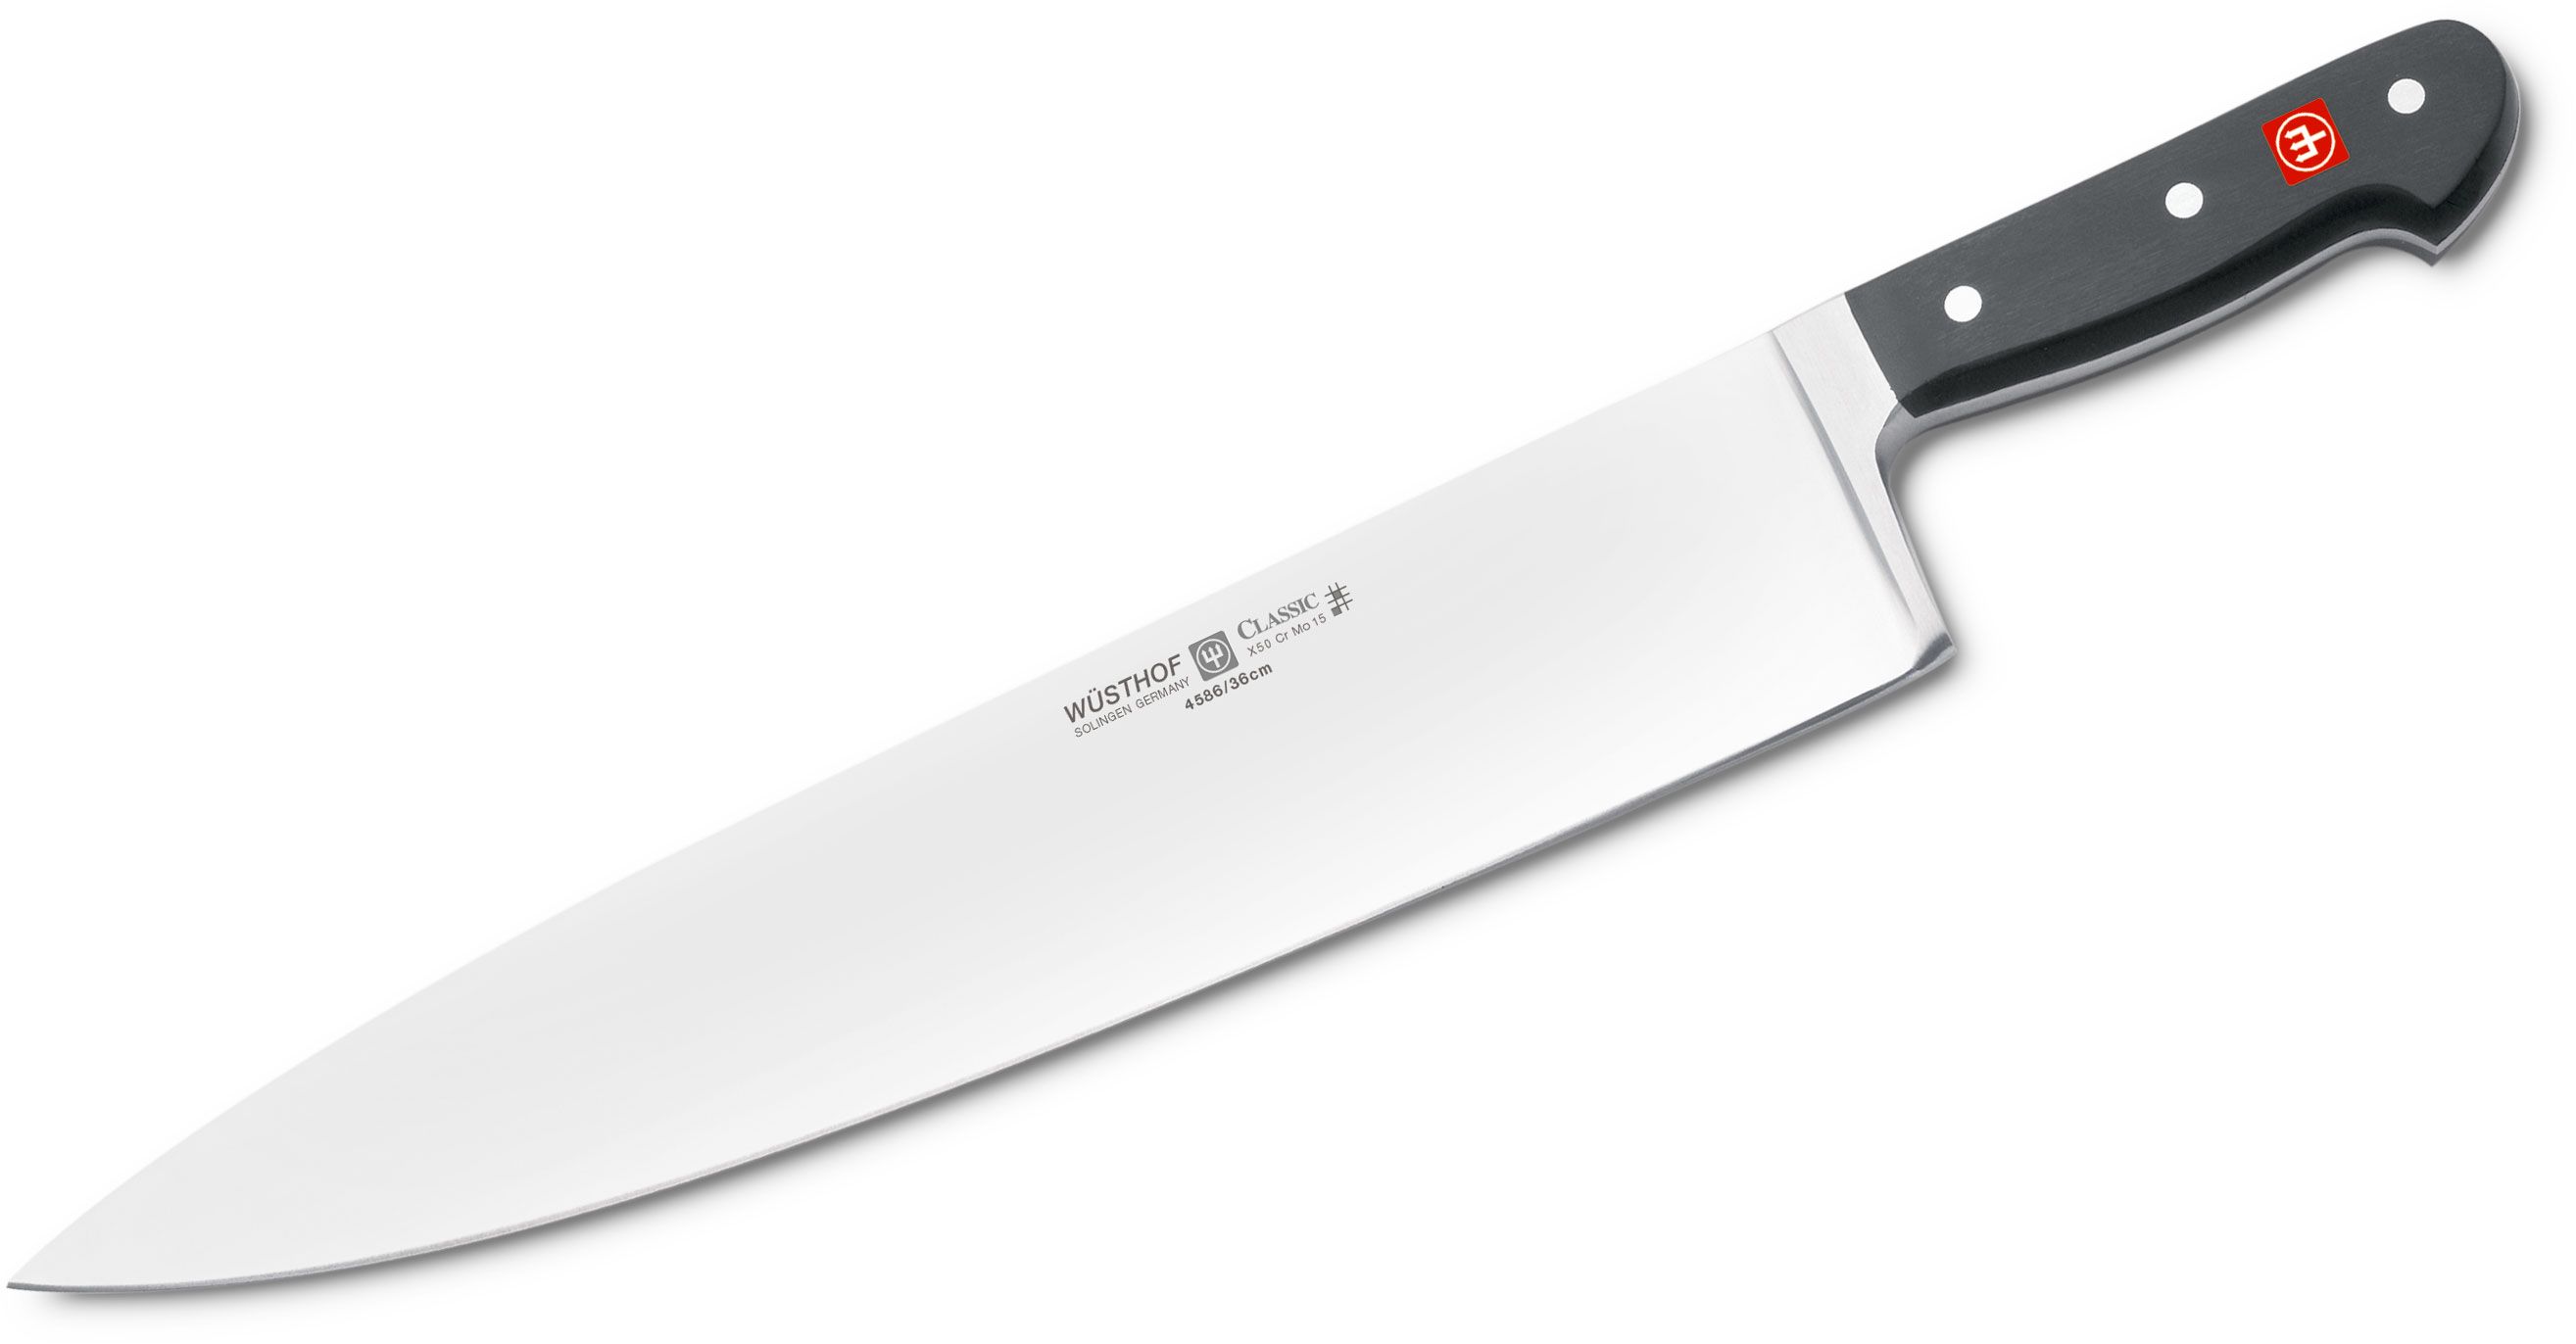 Wusthof Classic 14 Heavy, Wide Chef's Knife - KnifeCenter - 1030104136 -  Discontinued